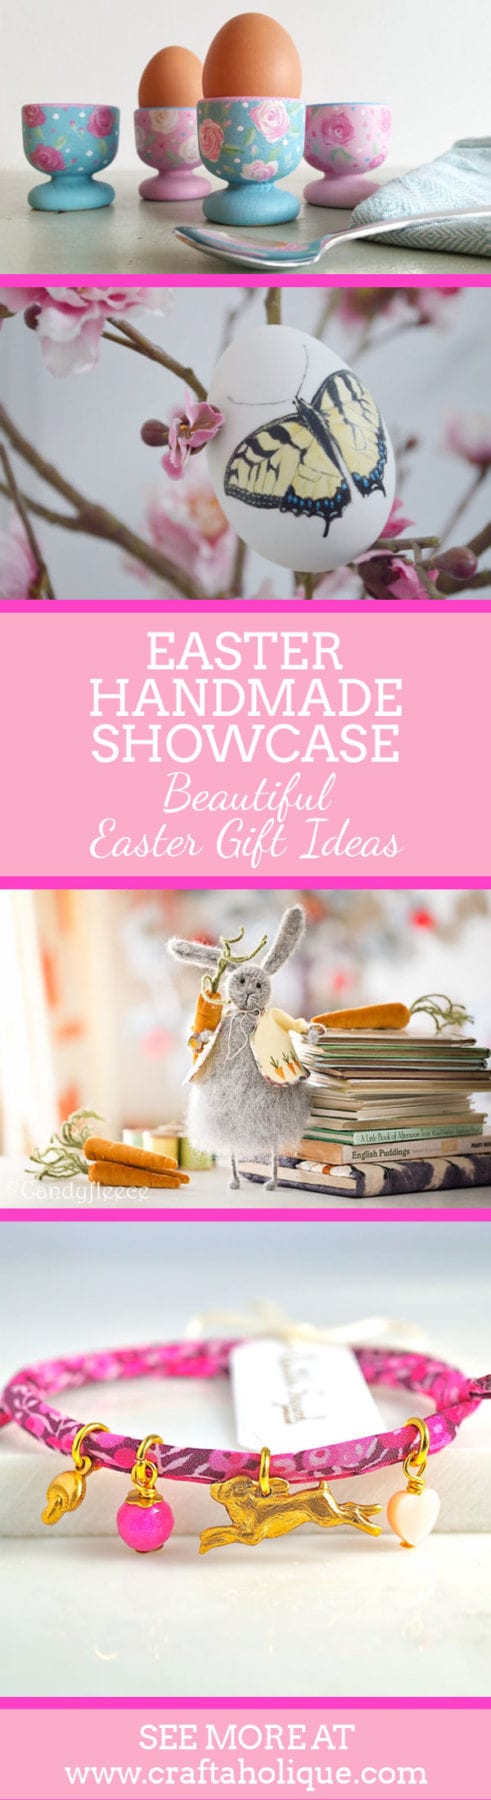 Handmade Easter Gifts from Etsy - Easter Home Decor, Easter Accessories and Easter Jewellery